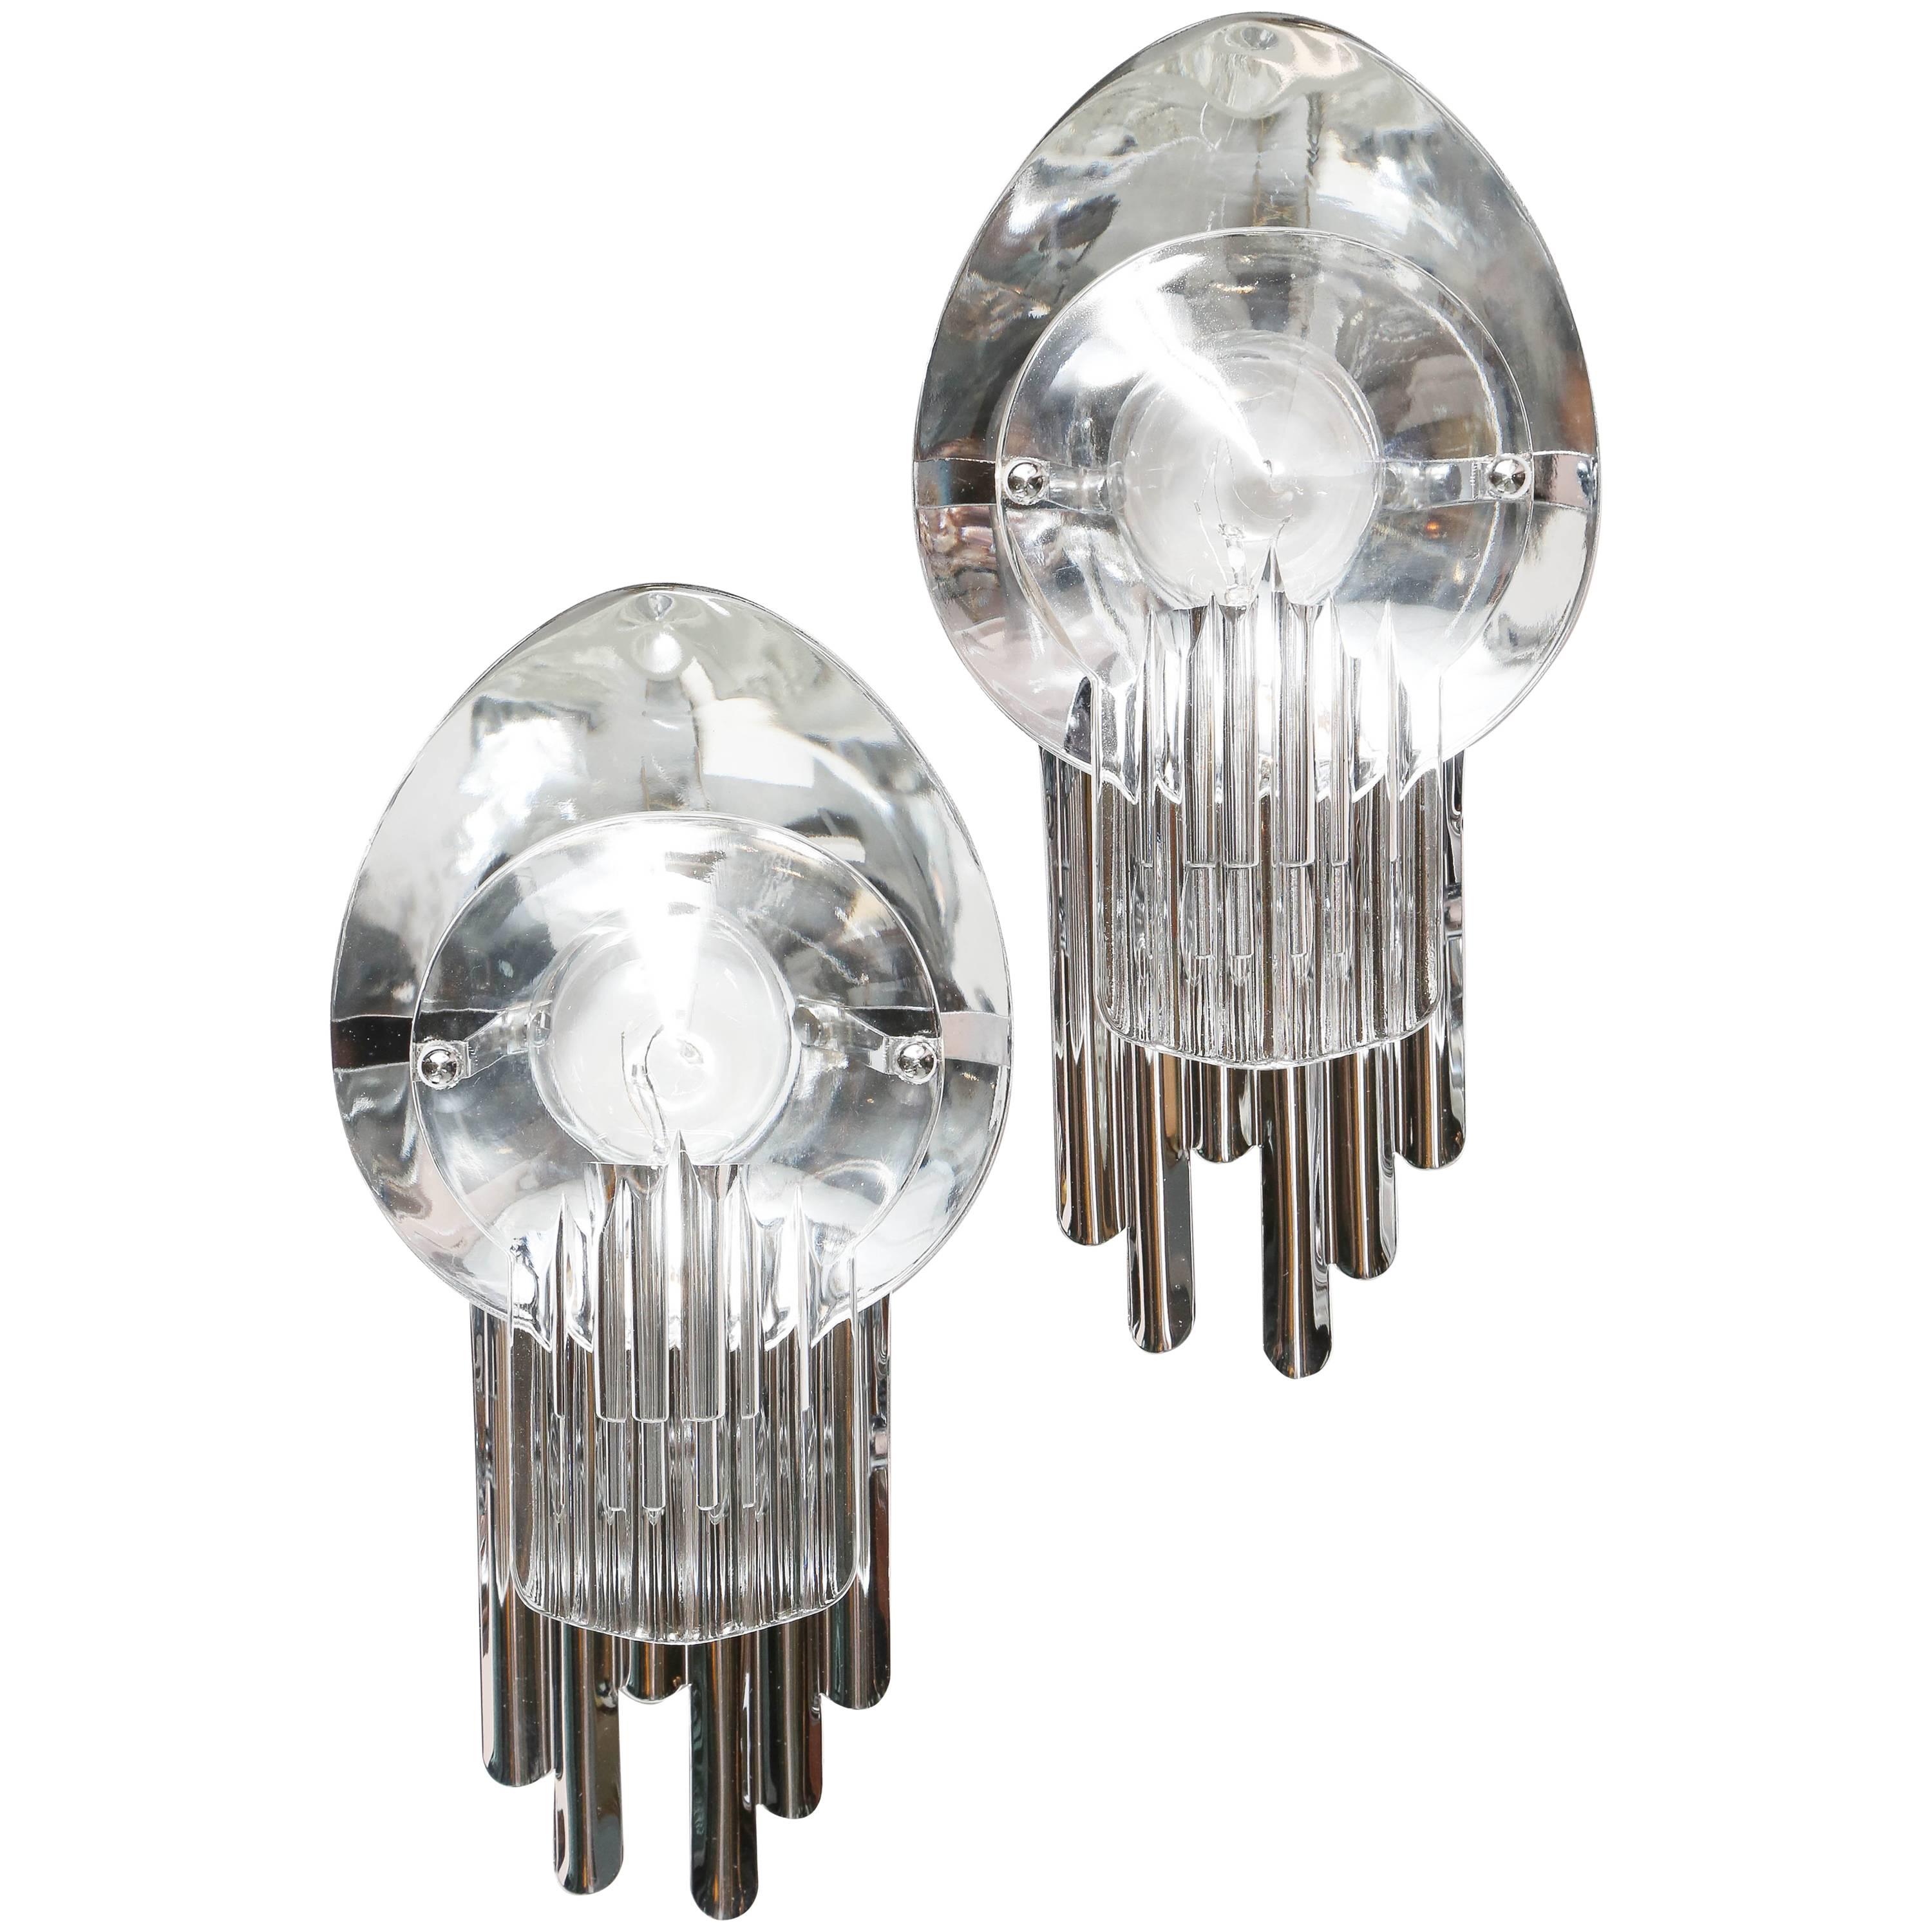 SALE !SALE! SALE !pr/Scolari Chrystal and Chrome Sconces with Magnifying Glass